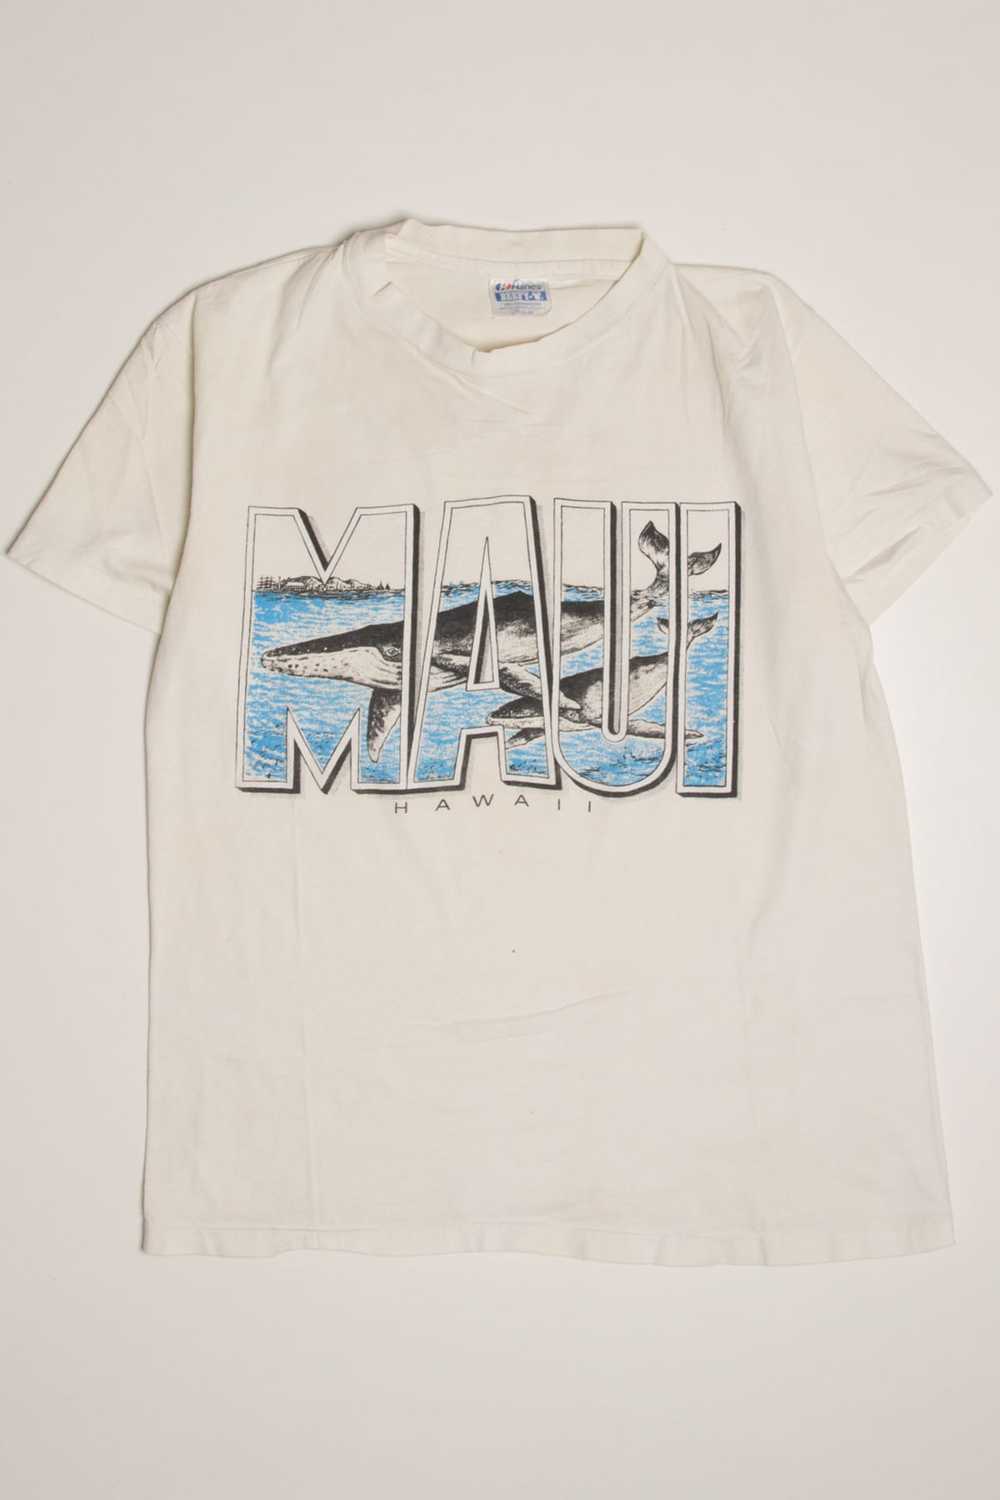 Vintage Maui Whale Watching T-Shirt (1990s) - image 2